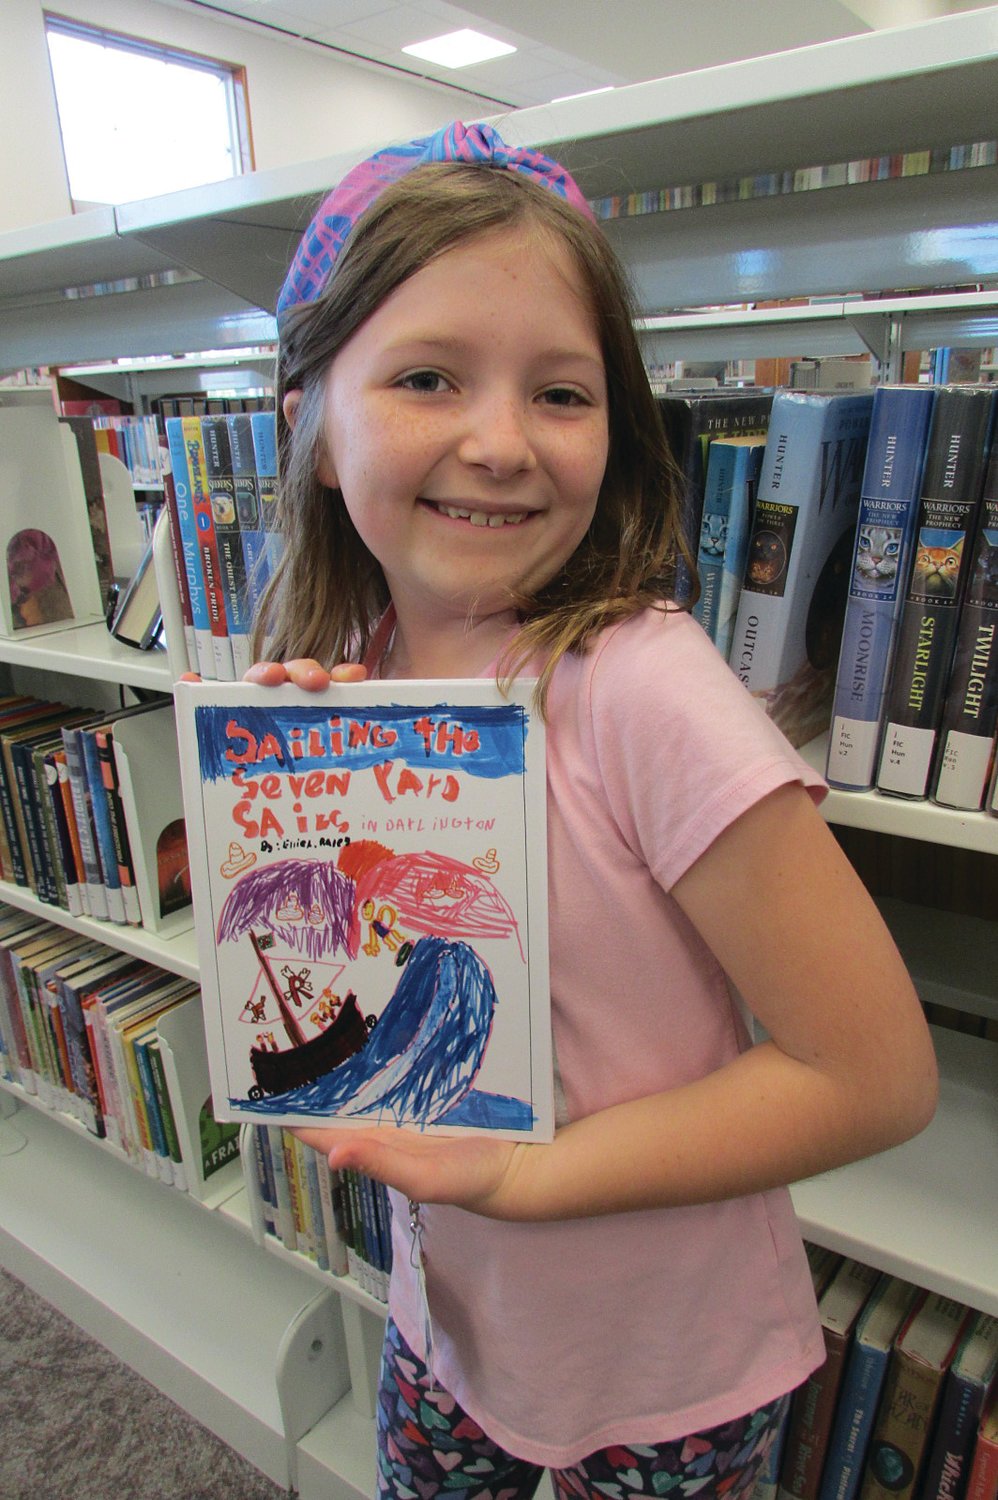 Ellie Raley, age 9, has written and published a book for children. She is the daughter of Kyle and Michelle Raley. She has written many stories, finished and unfinished. Her dream to have a published book in a library will come true as her book, "Sailing the Seven Yard Sails in Darlington," will hit library shelves this October. Raley has generously donated her book to the Crawfordsville District Public Library.